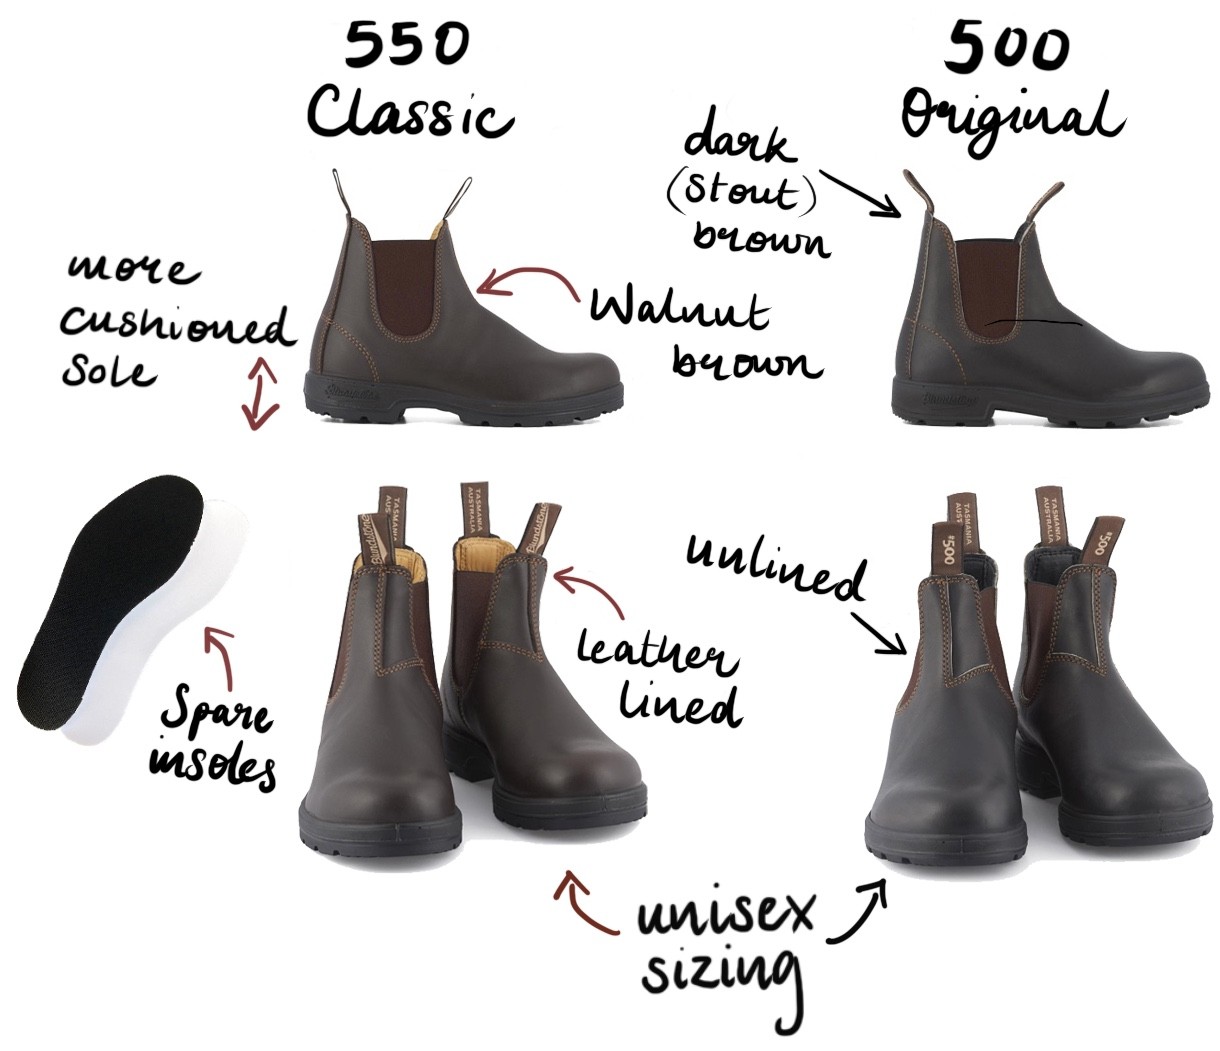 Blundstone USA - Chelsea Boots For Men, Women & Kids, Work Boots